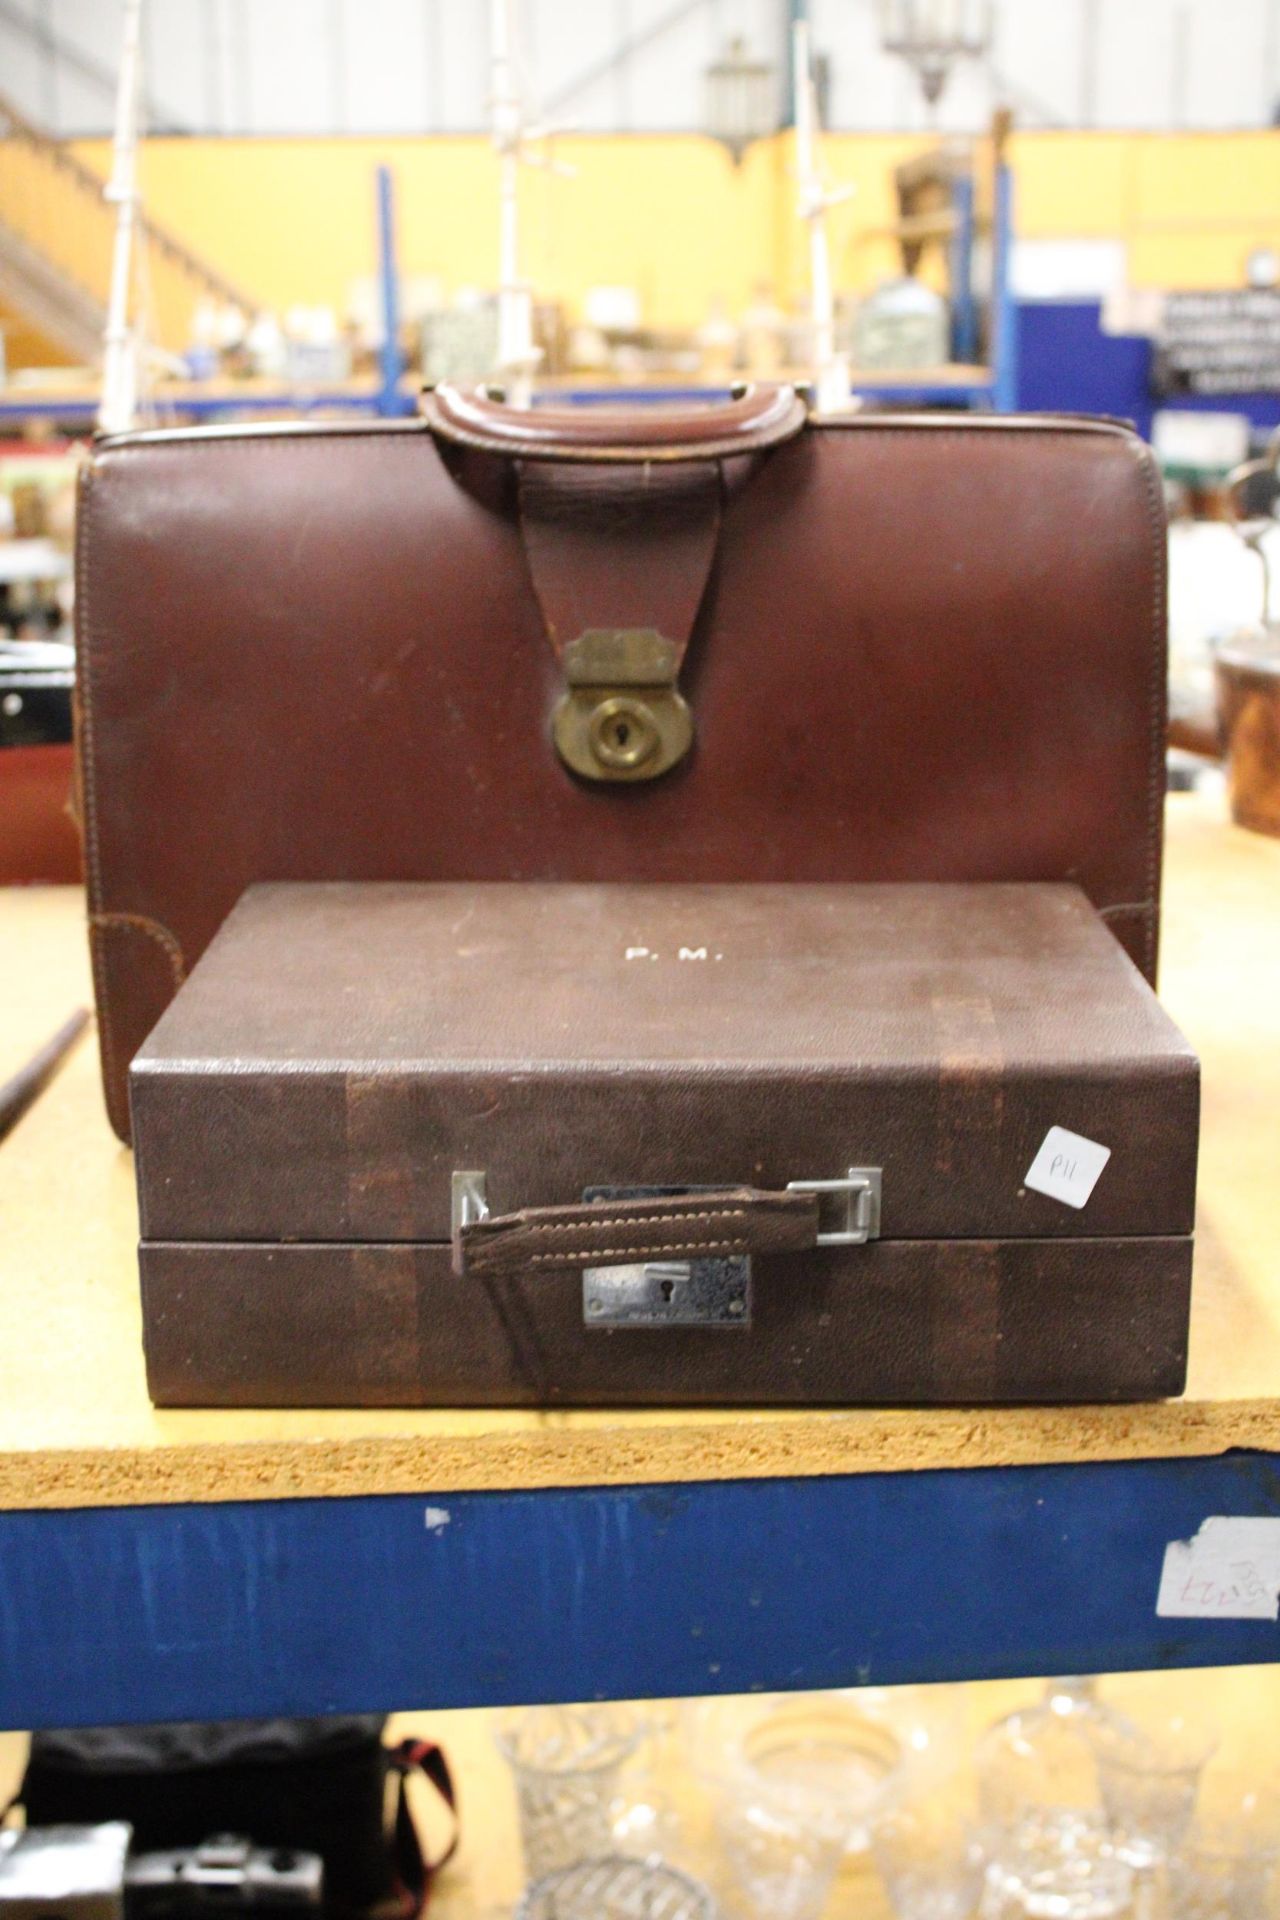 TWO VINTAGE BRIEFCASES